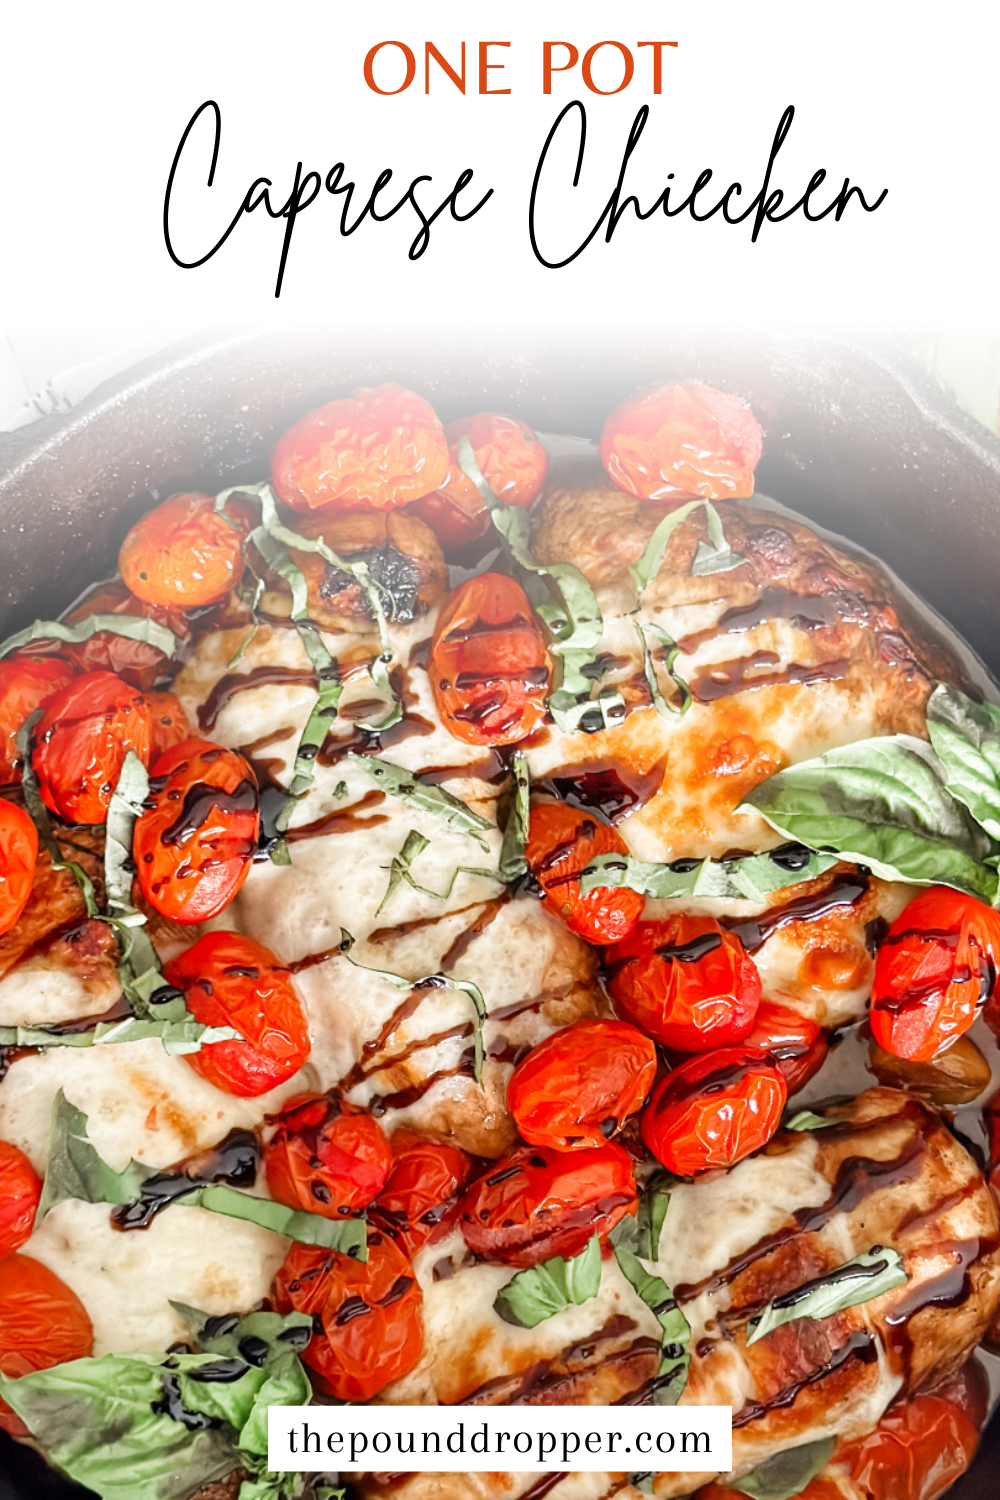 This One Pan Caprese Chicken is filled with fresh ingredients-using just one pan! Balsamic glazed chicken with juicy cherry tomatoes, fresh basil, and topped with melted mozzarella cheese! It's that good! via @pounddropper